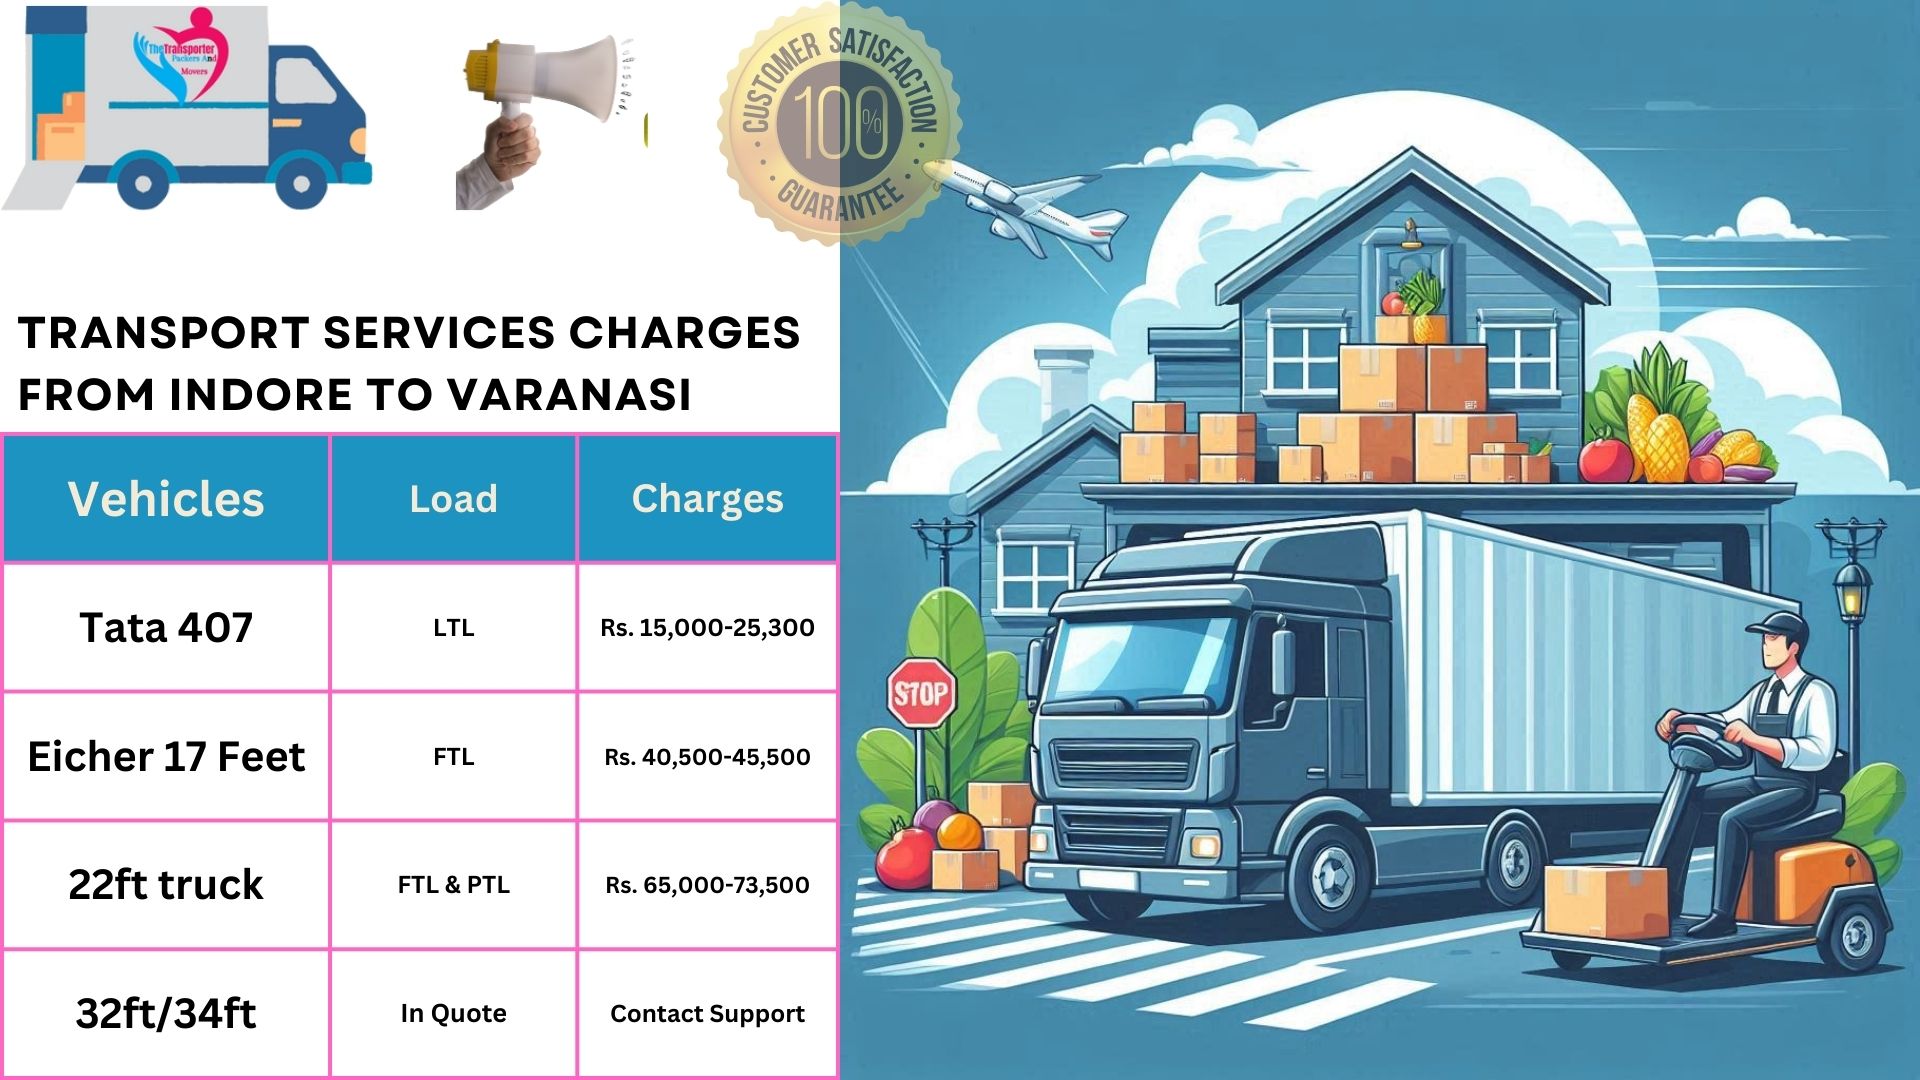 Your household goods shifting from Indore to Varanasi